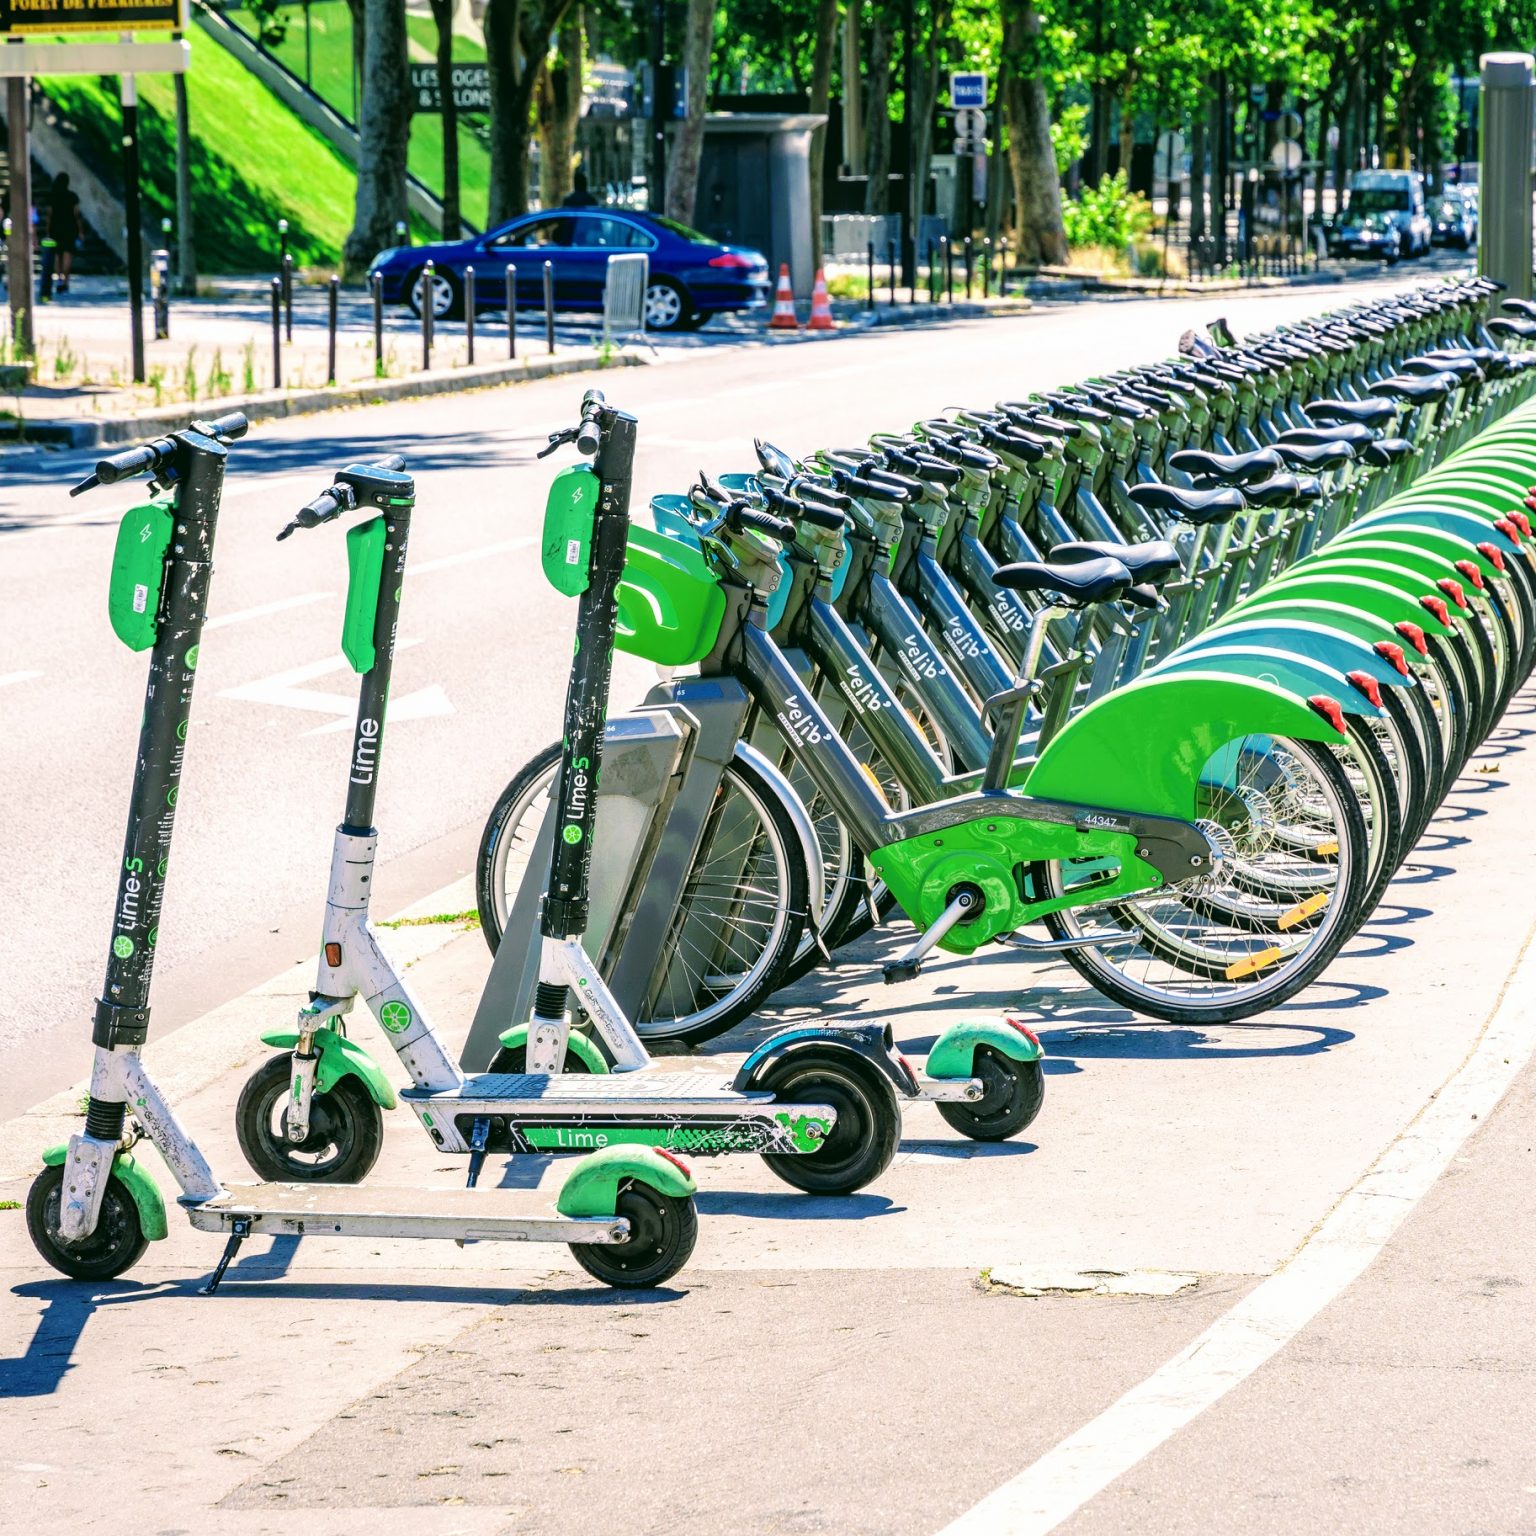 An image of multiple electric bikes and electric scooters parked side by side.